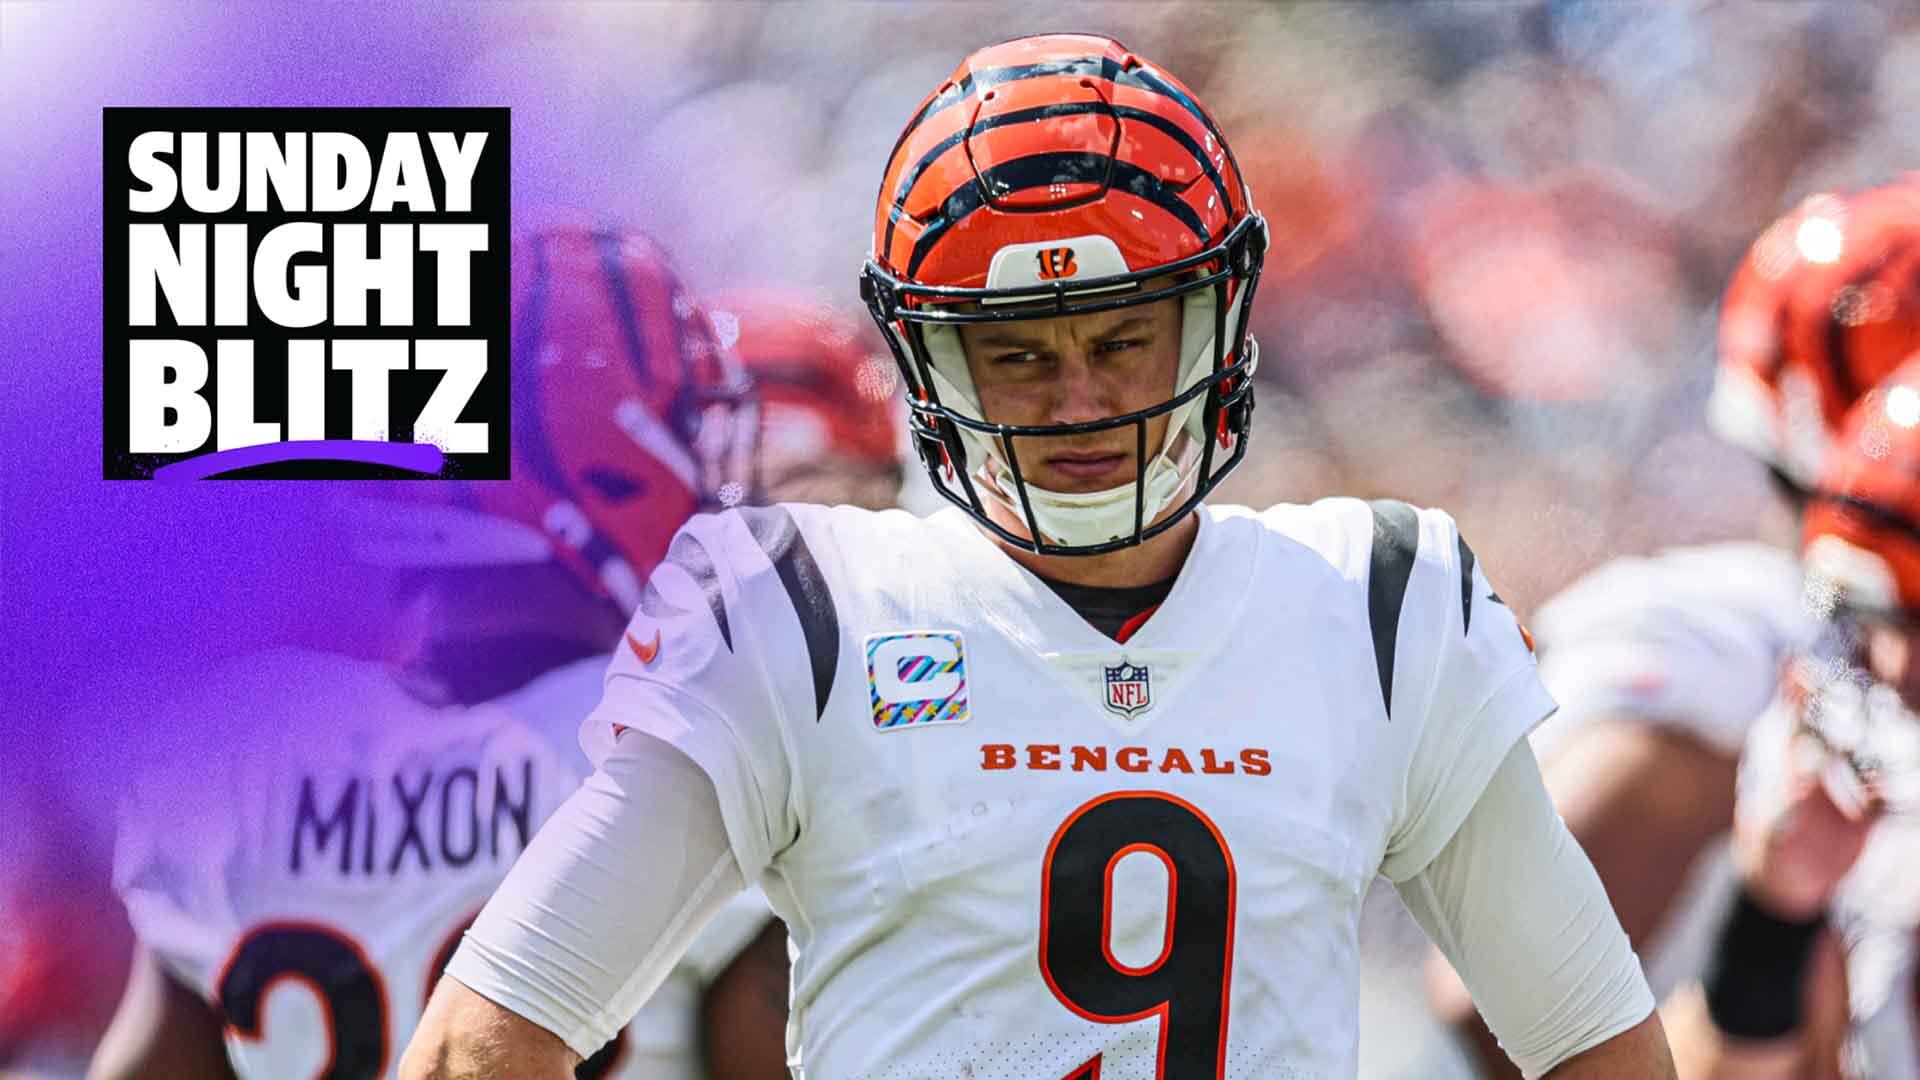 What's wrong with the Bengals?